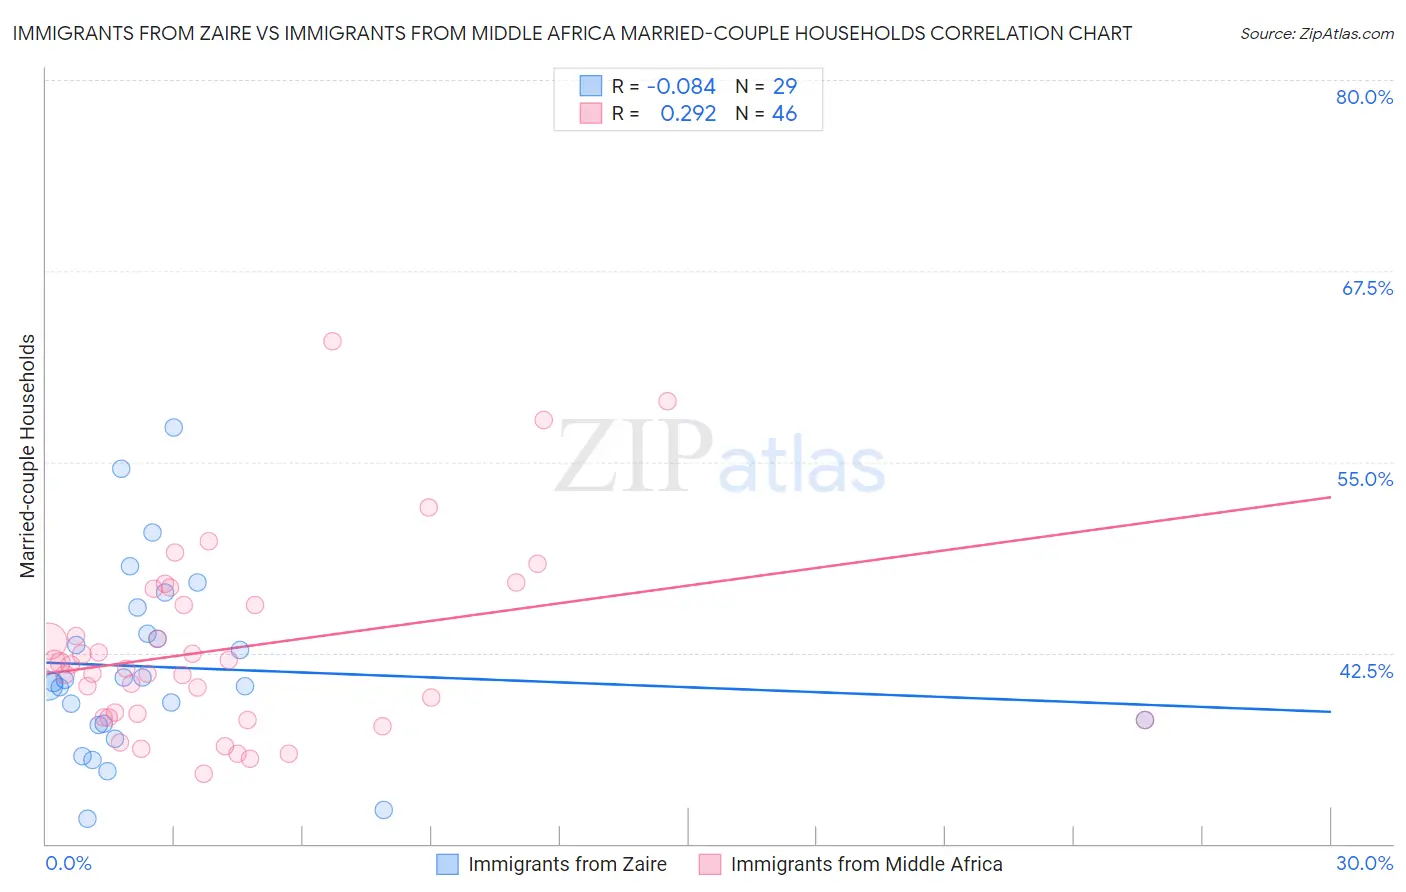 Immigrants from Zaire vs Immigrants from Middle Africa Married-couple Households